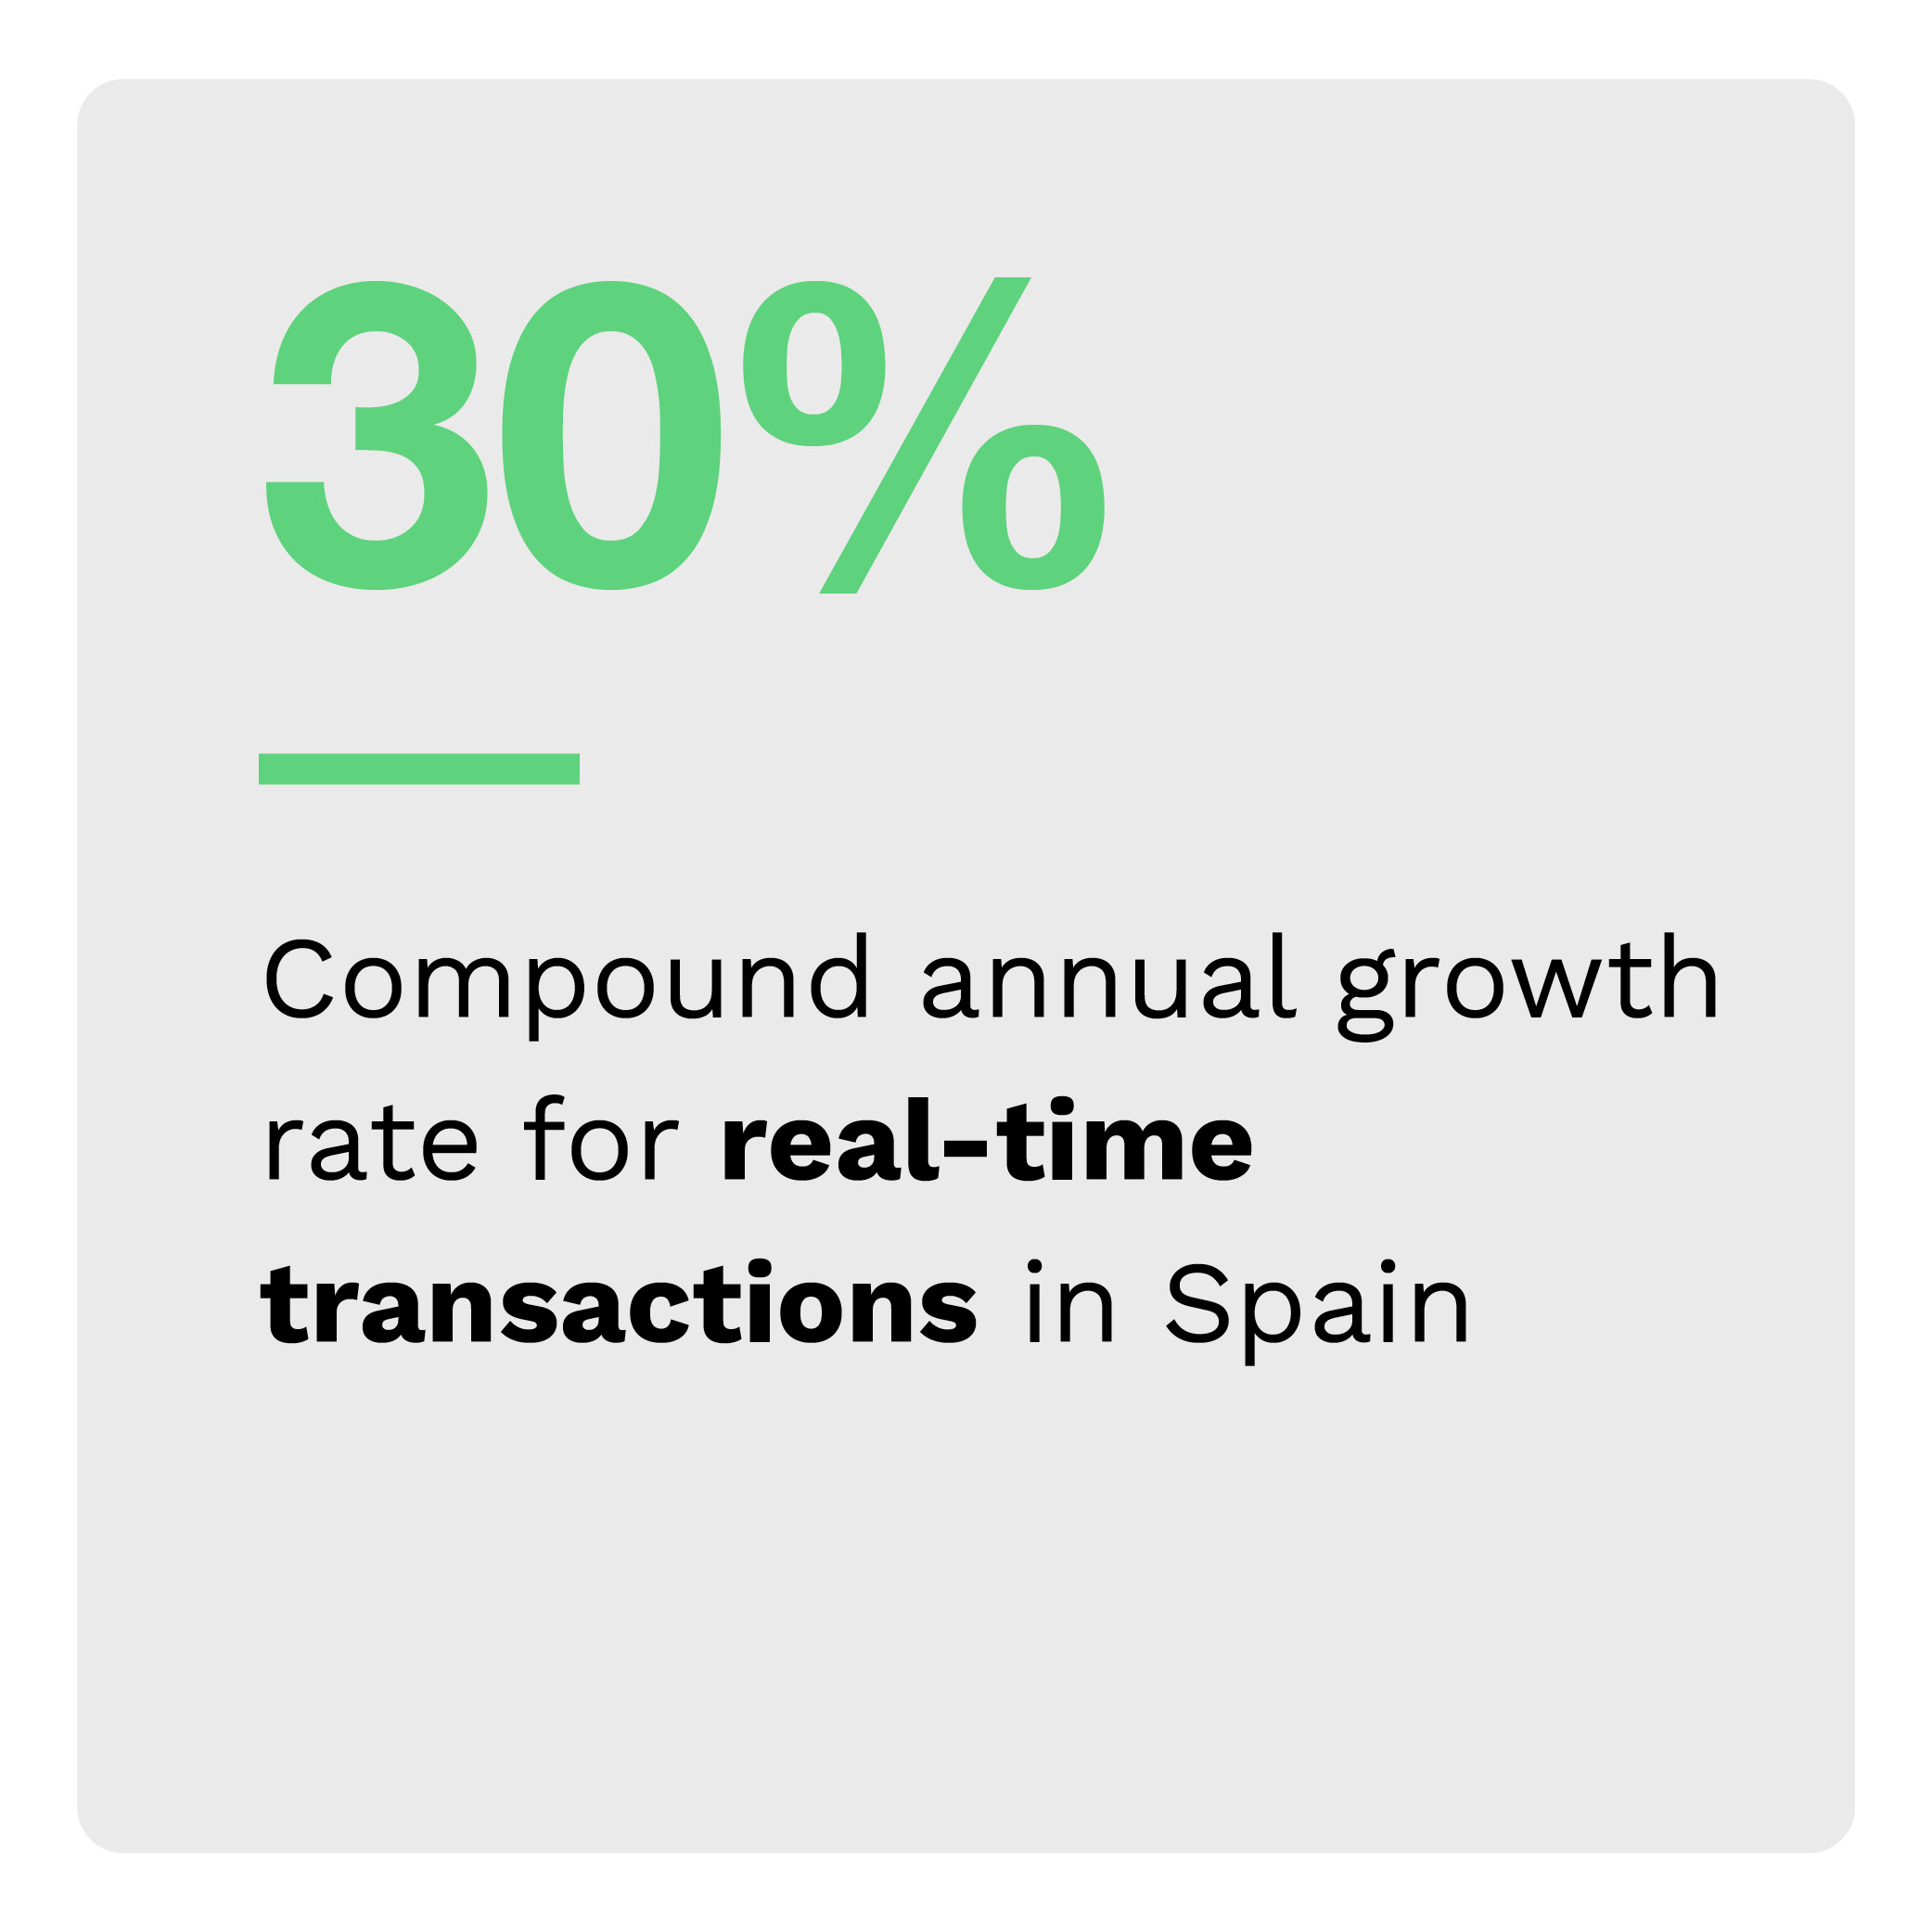 30%: Compound annual growth rate for real-time transactions in Spain